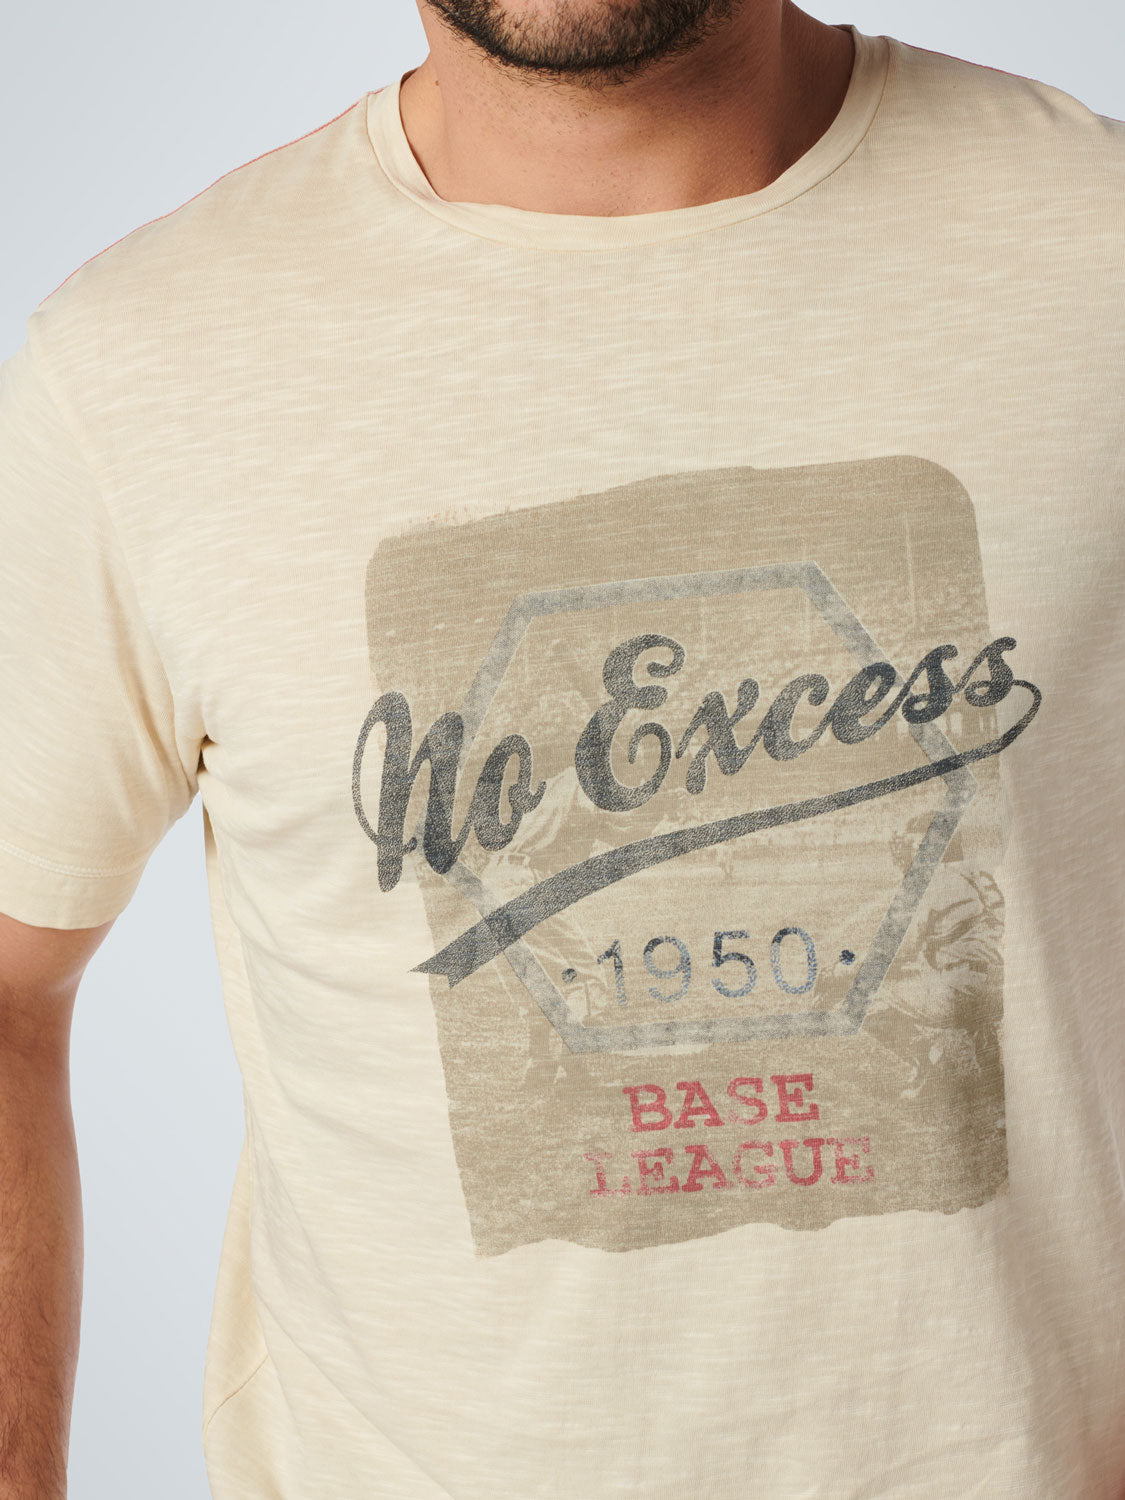 No Excess - Dyed Print T-Shirt - Cream or Light Army Green